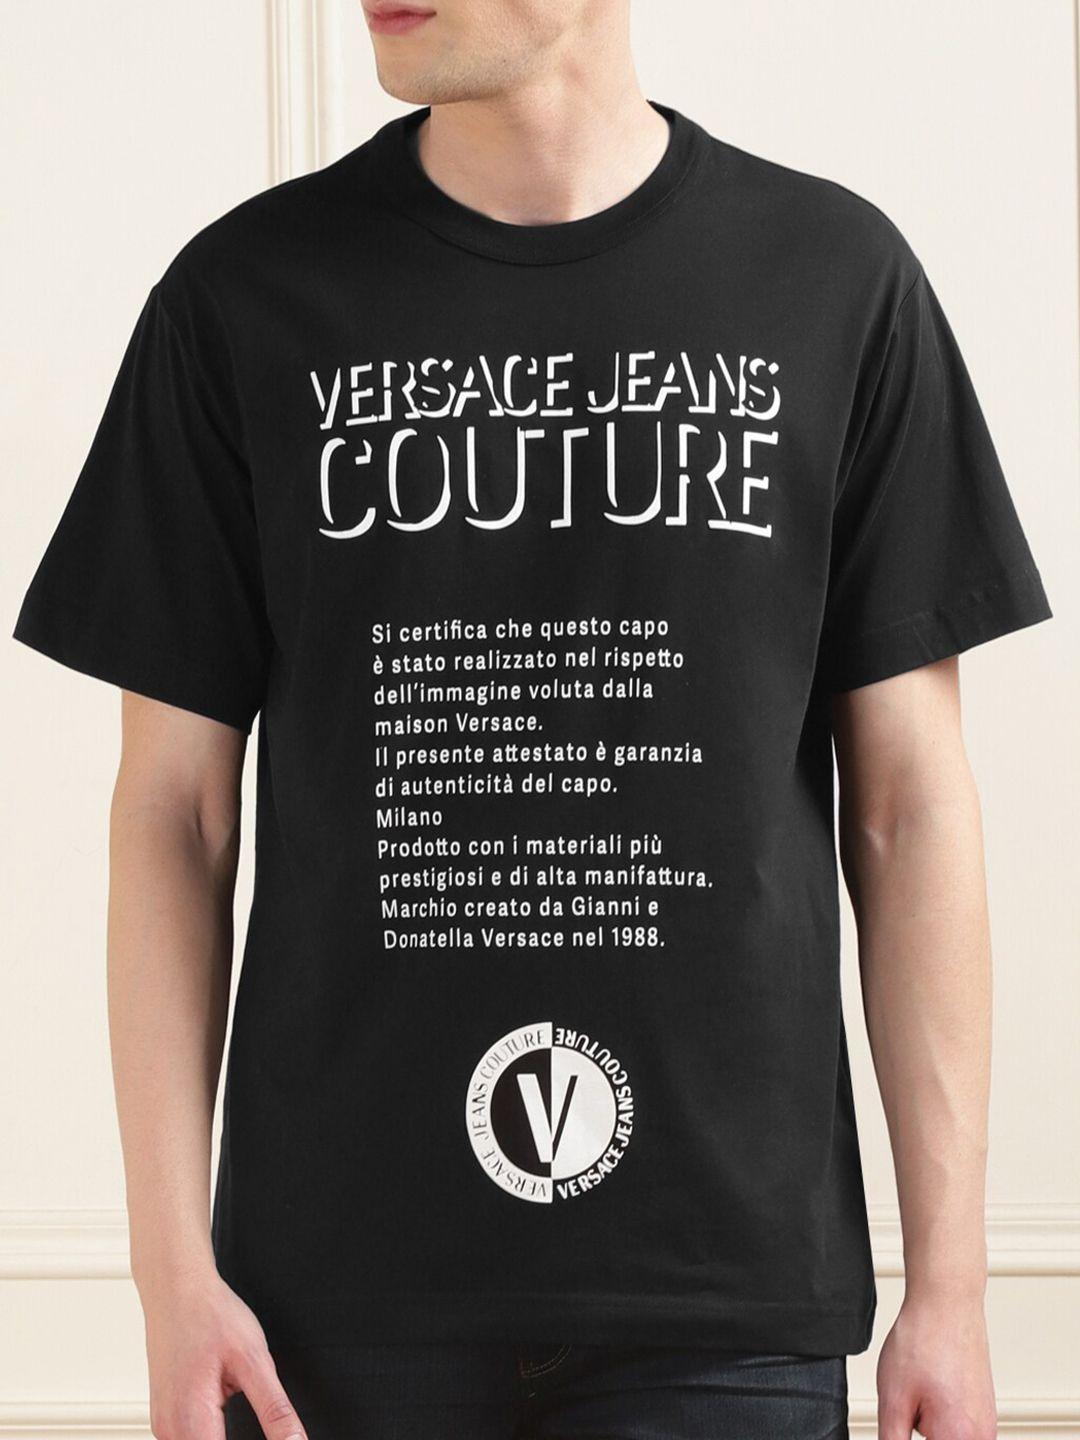 versace jeans couture typography printed monochrome cotton t-shirt